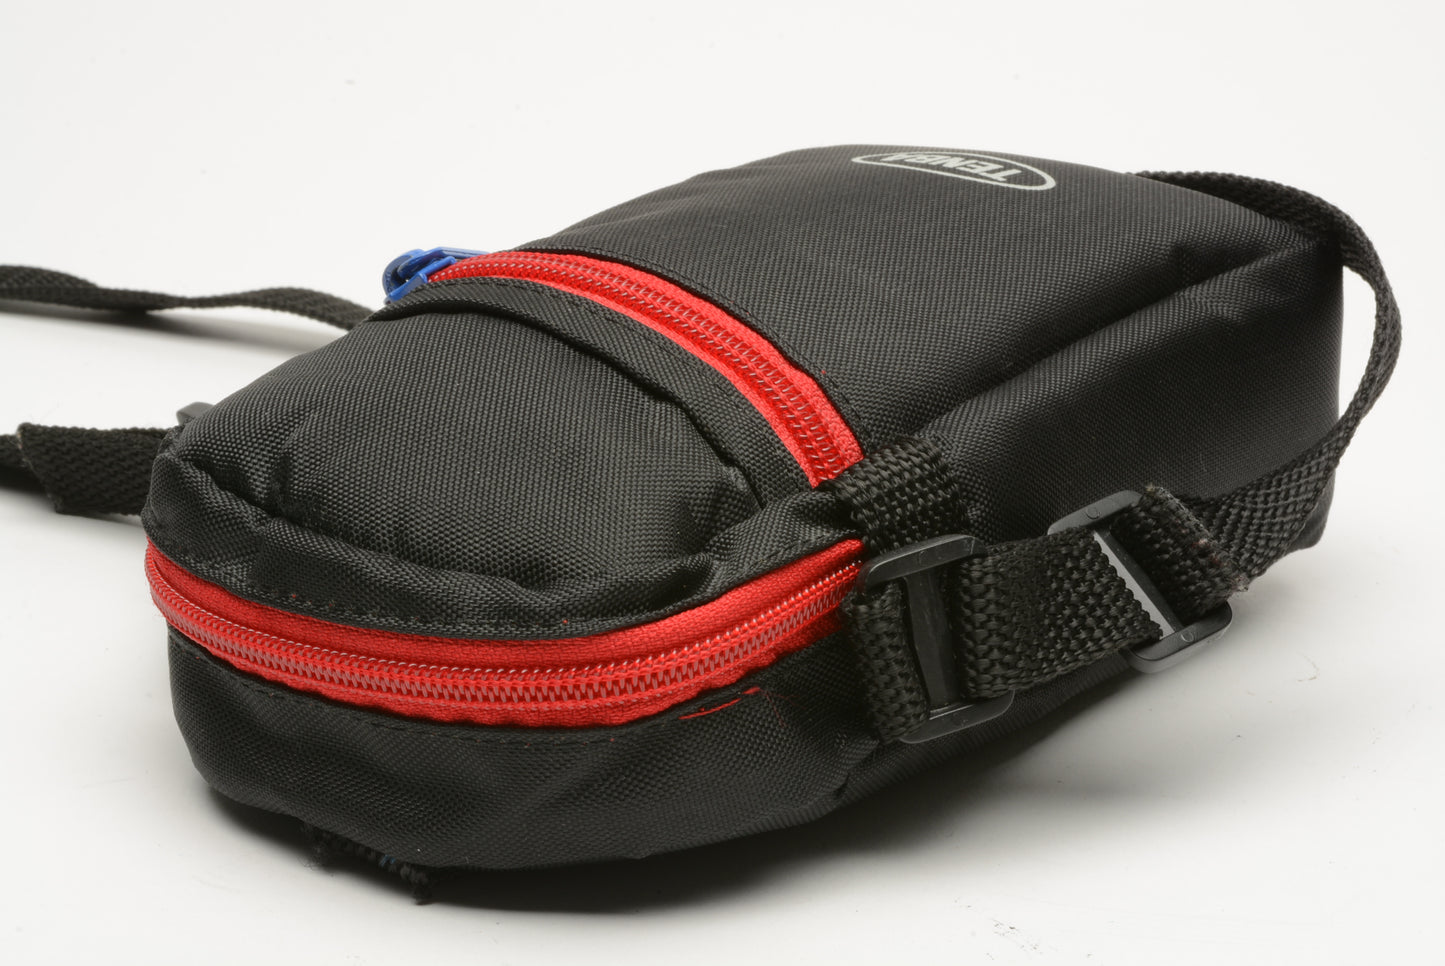 Tenba 80s style padded camera case (Black/red/blue) nice & clean ~7x4x2"